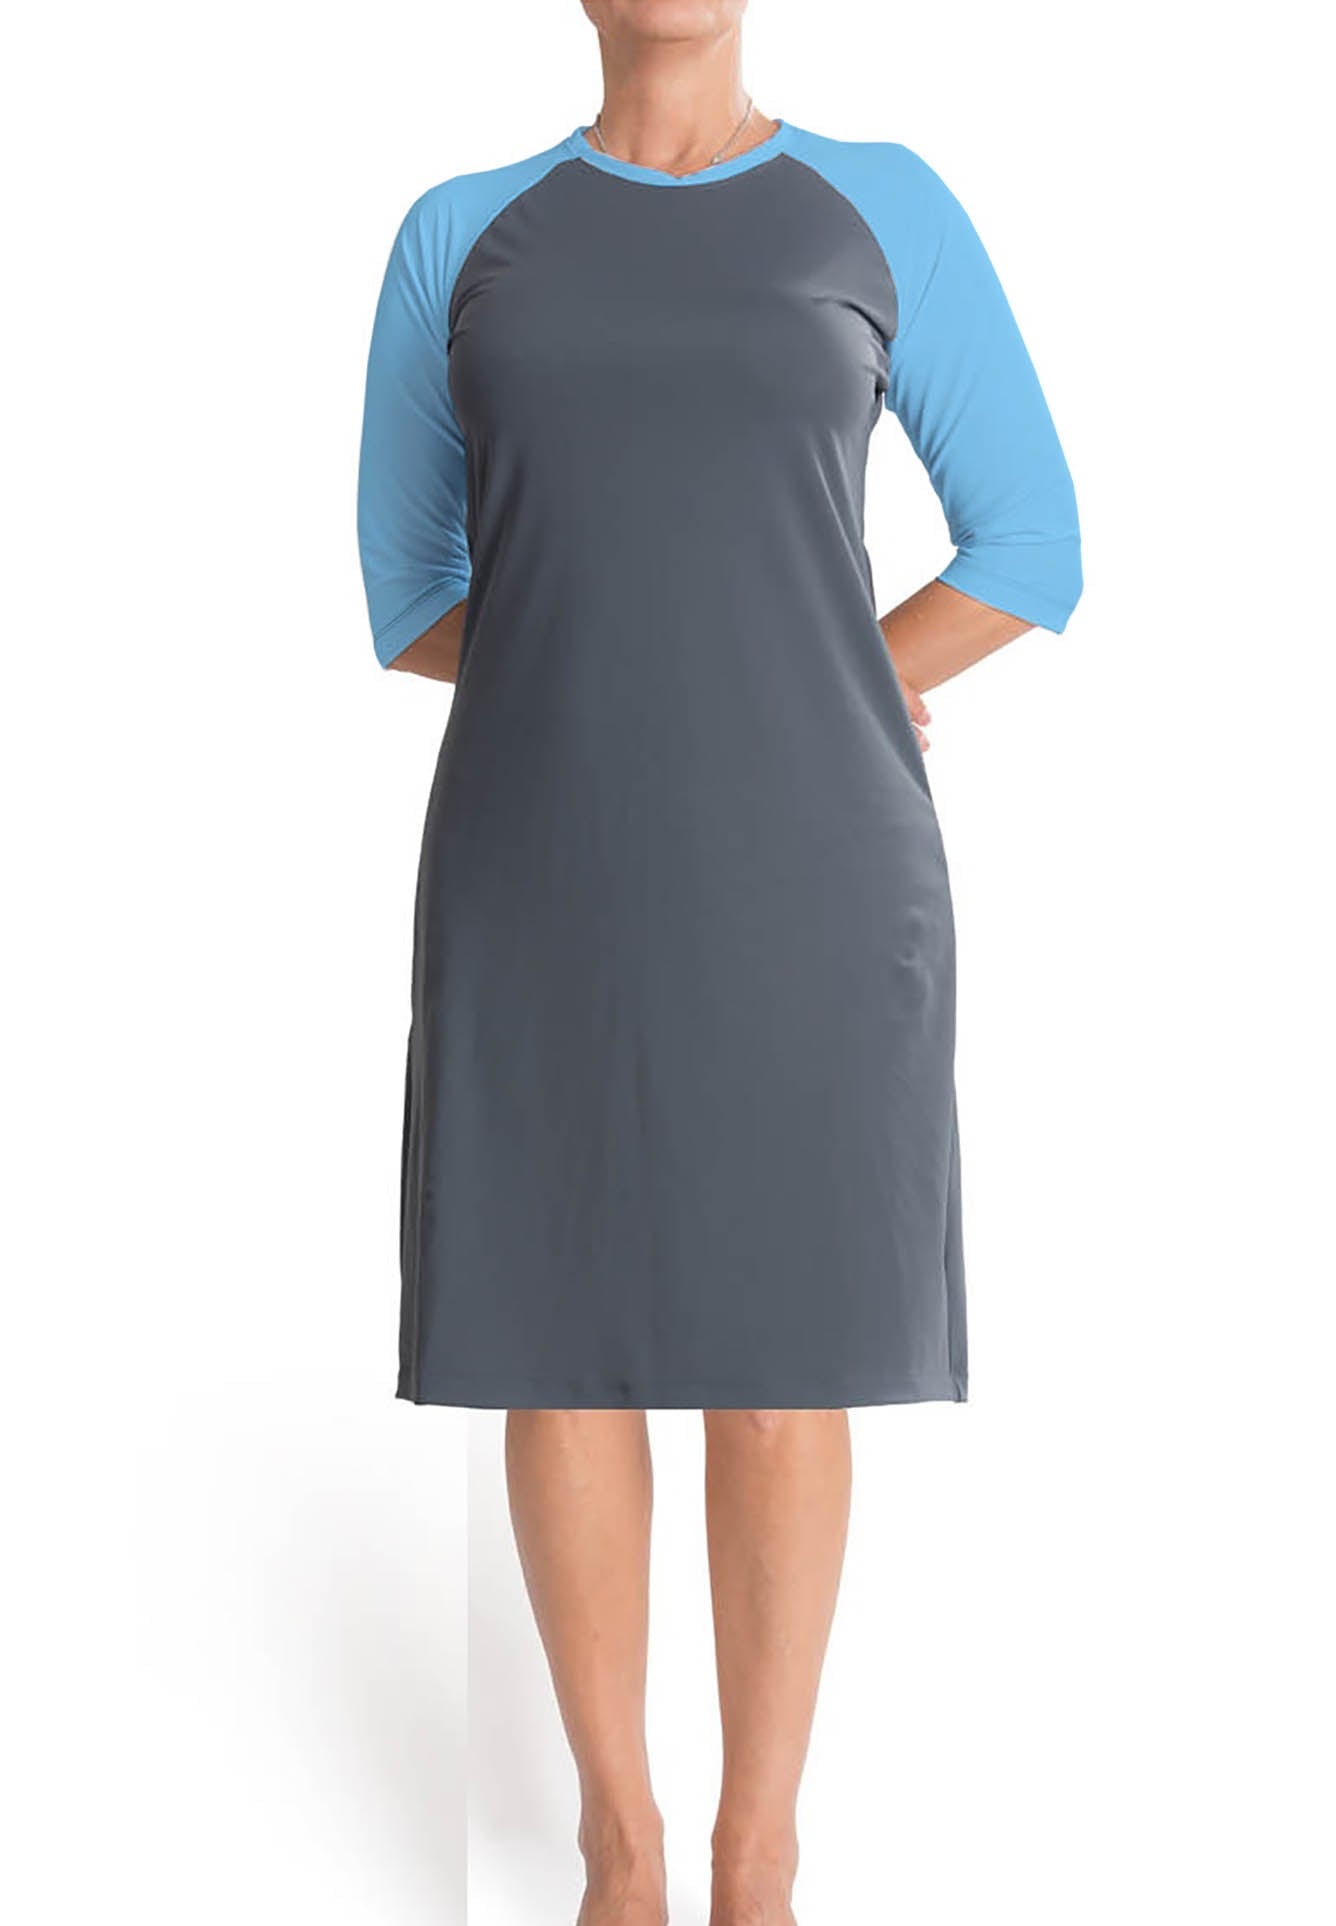 Women's modest swim dress in gray with blue sleeves.